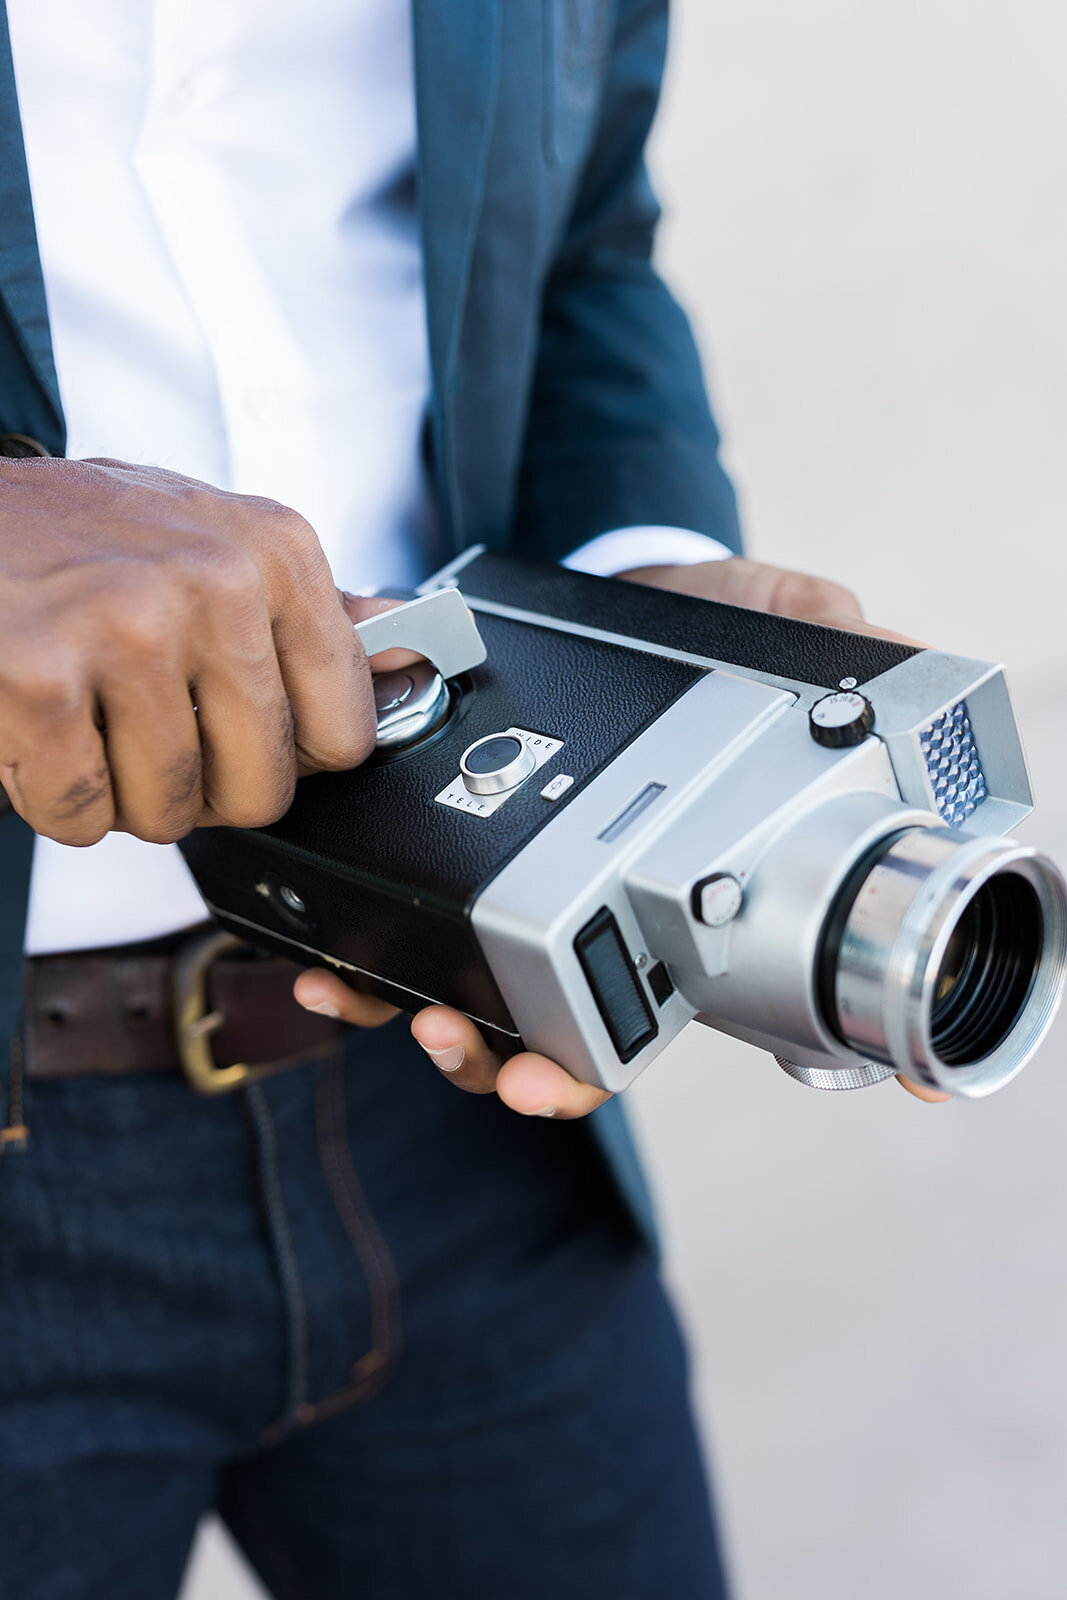 Close up of camera with a hand adjusting its dials